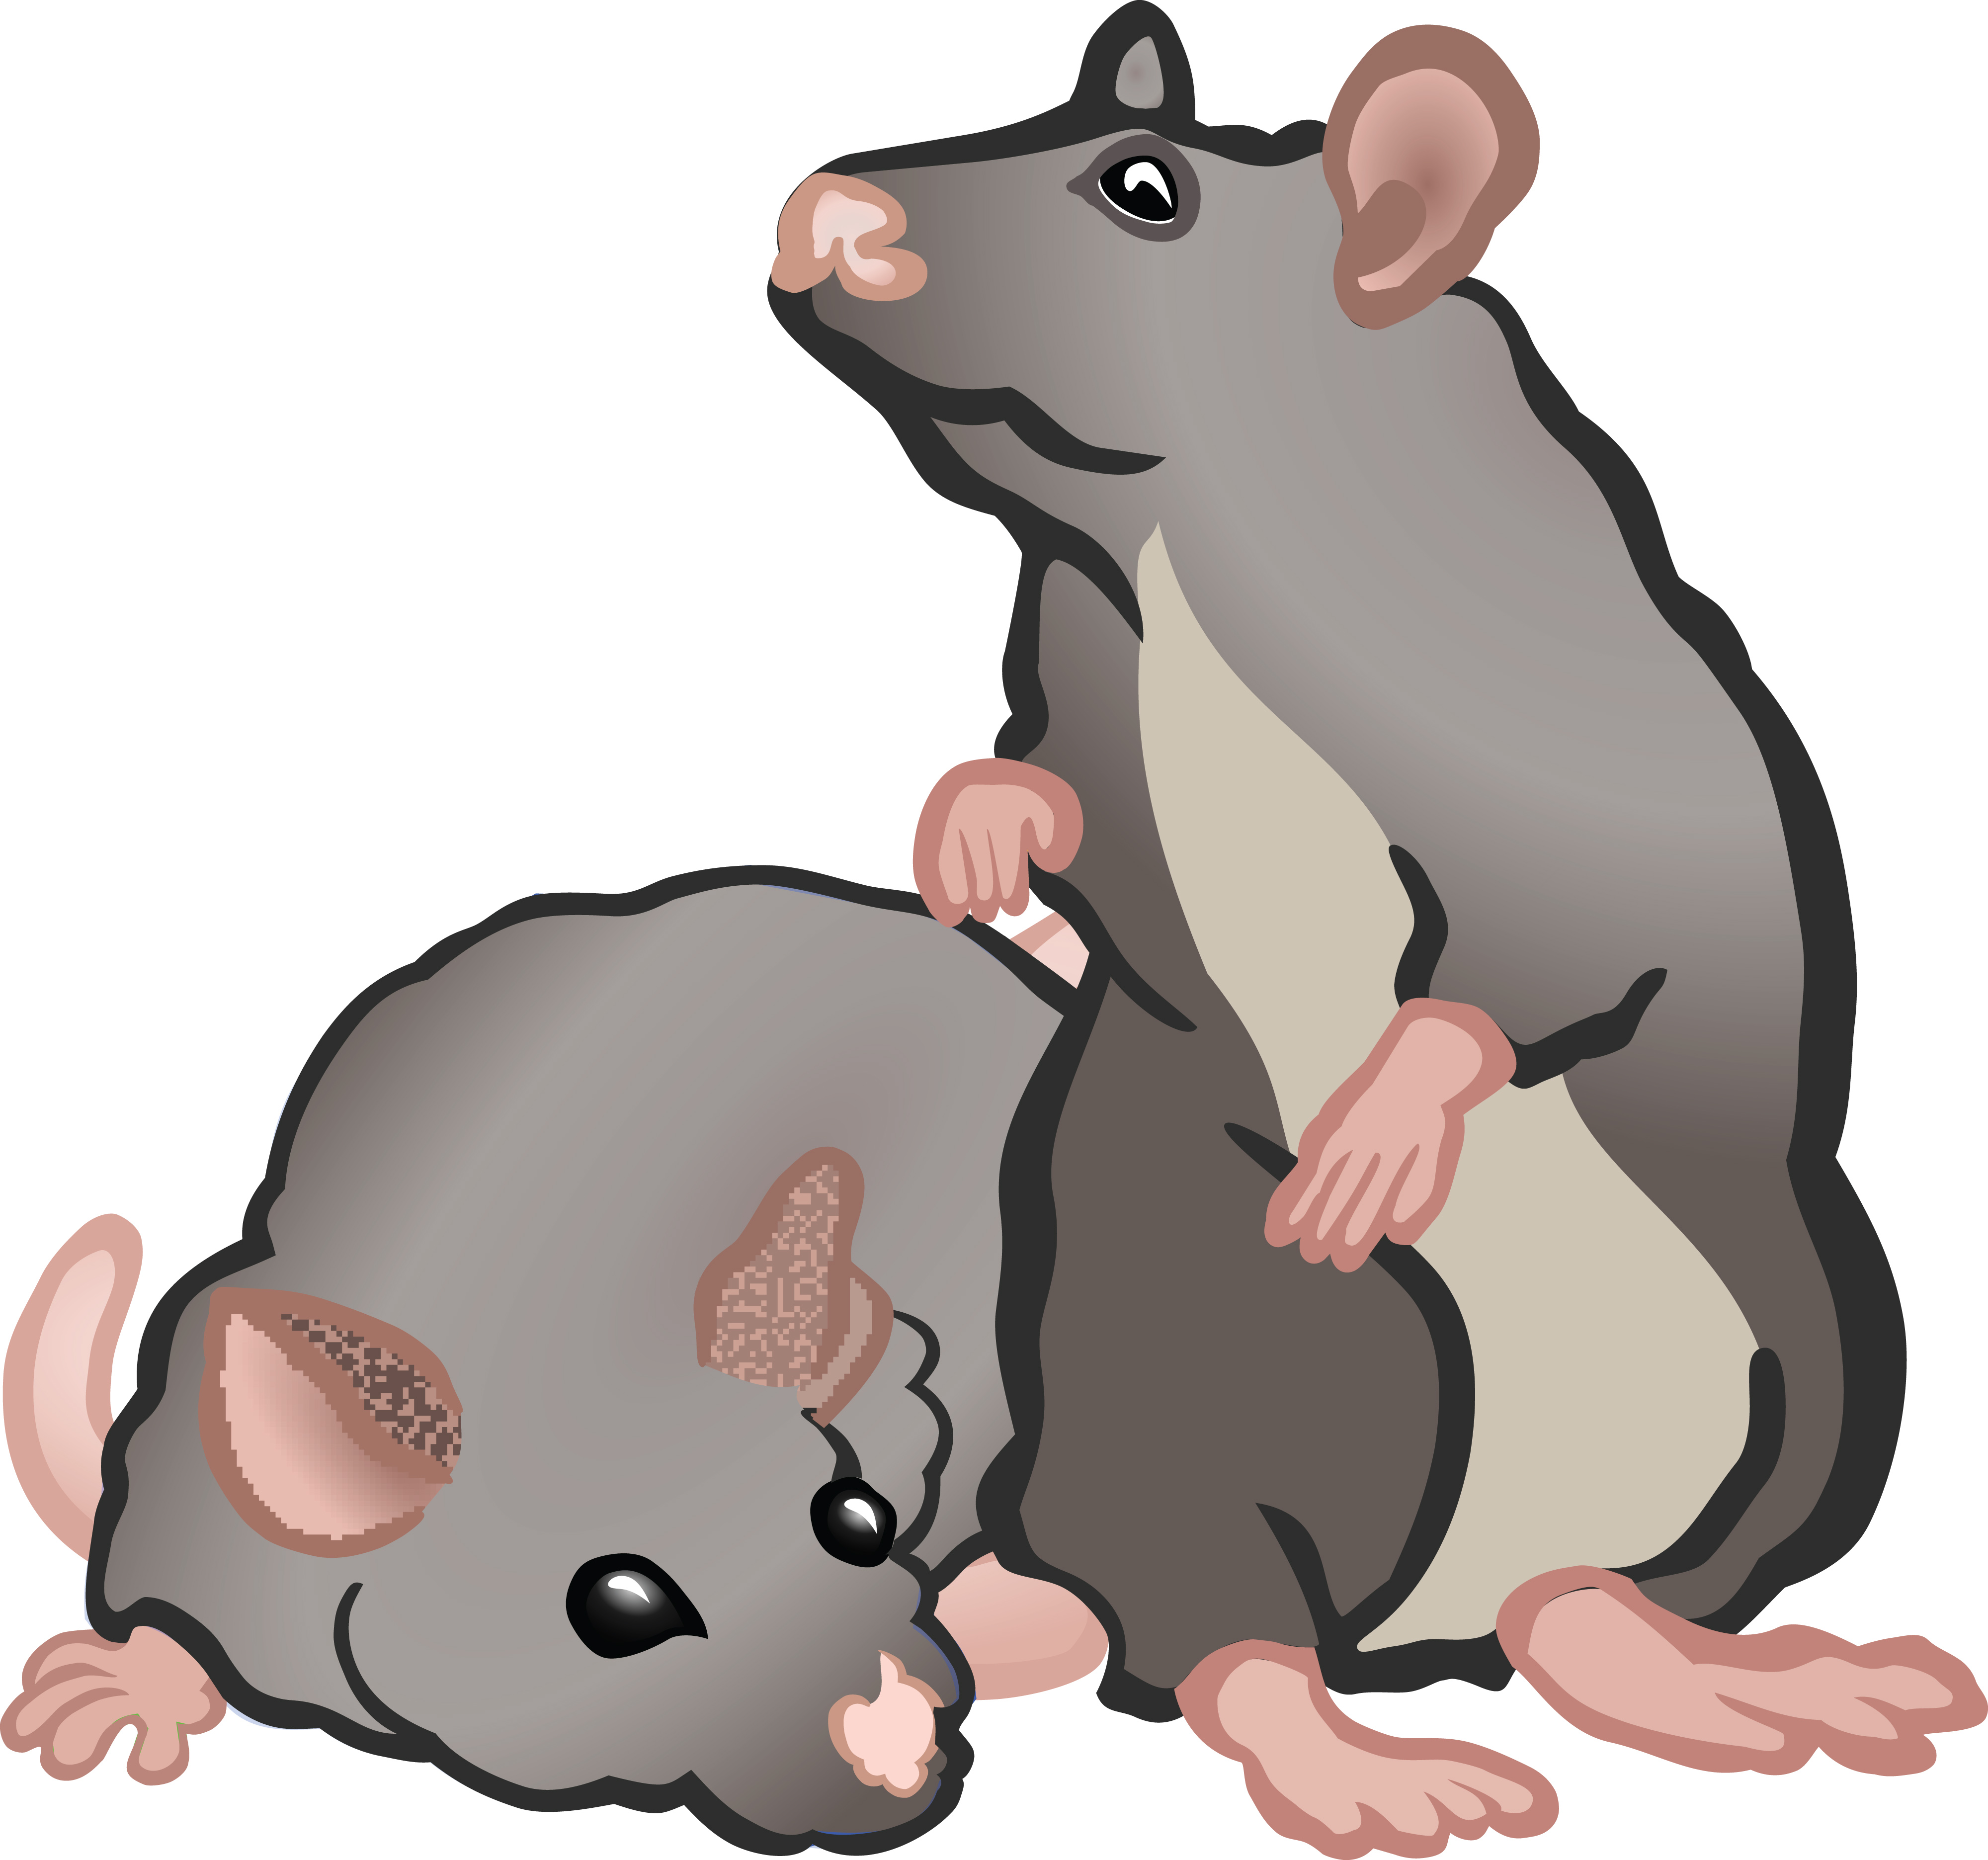 Free Clipart Of rats or mice